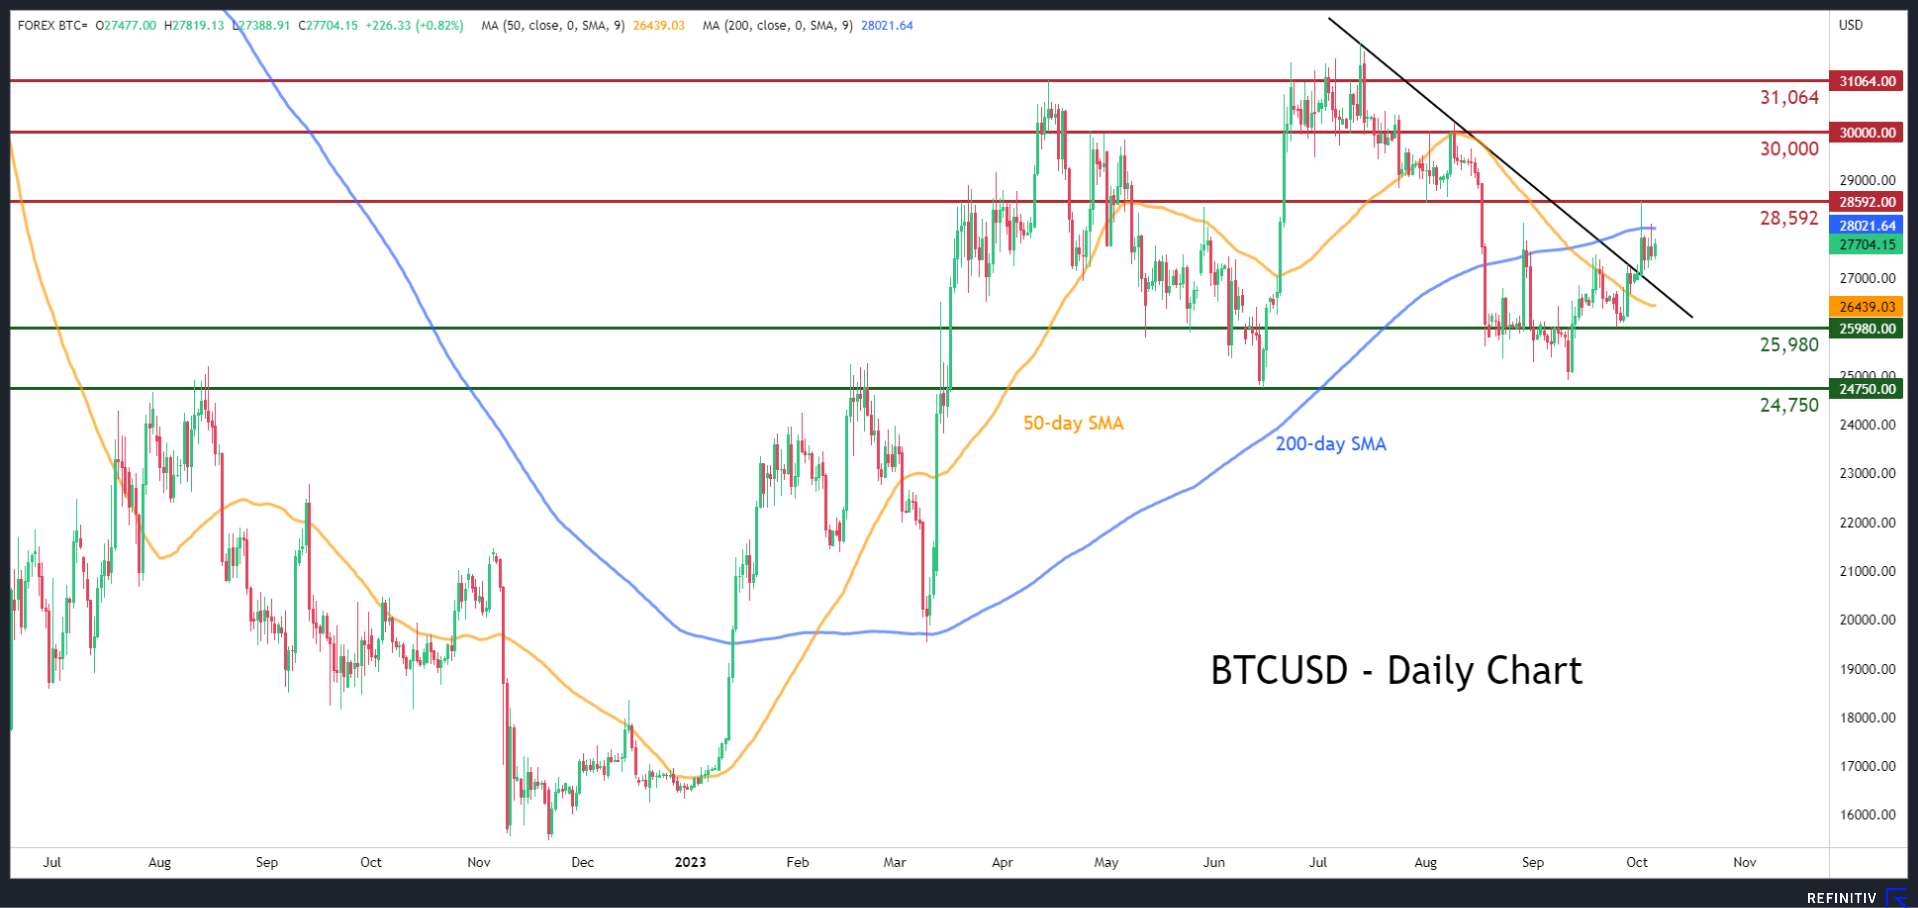 Bitcoin unsusceptible to stock selloff but fails to claim $28,000 – Crypto News